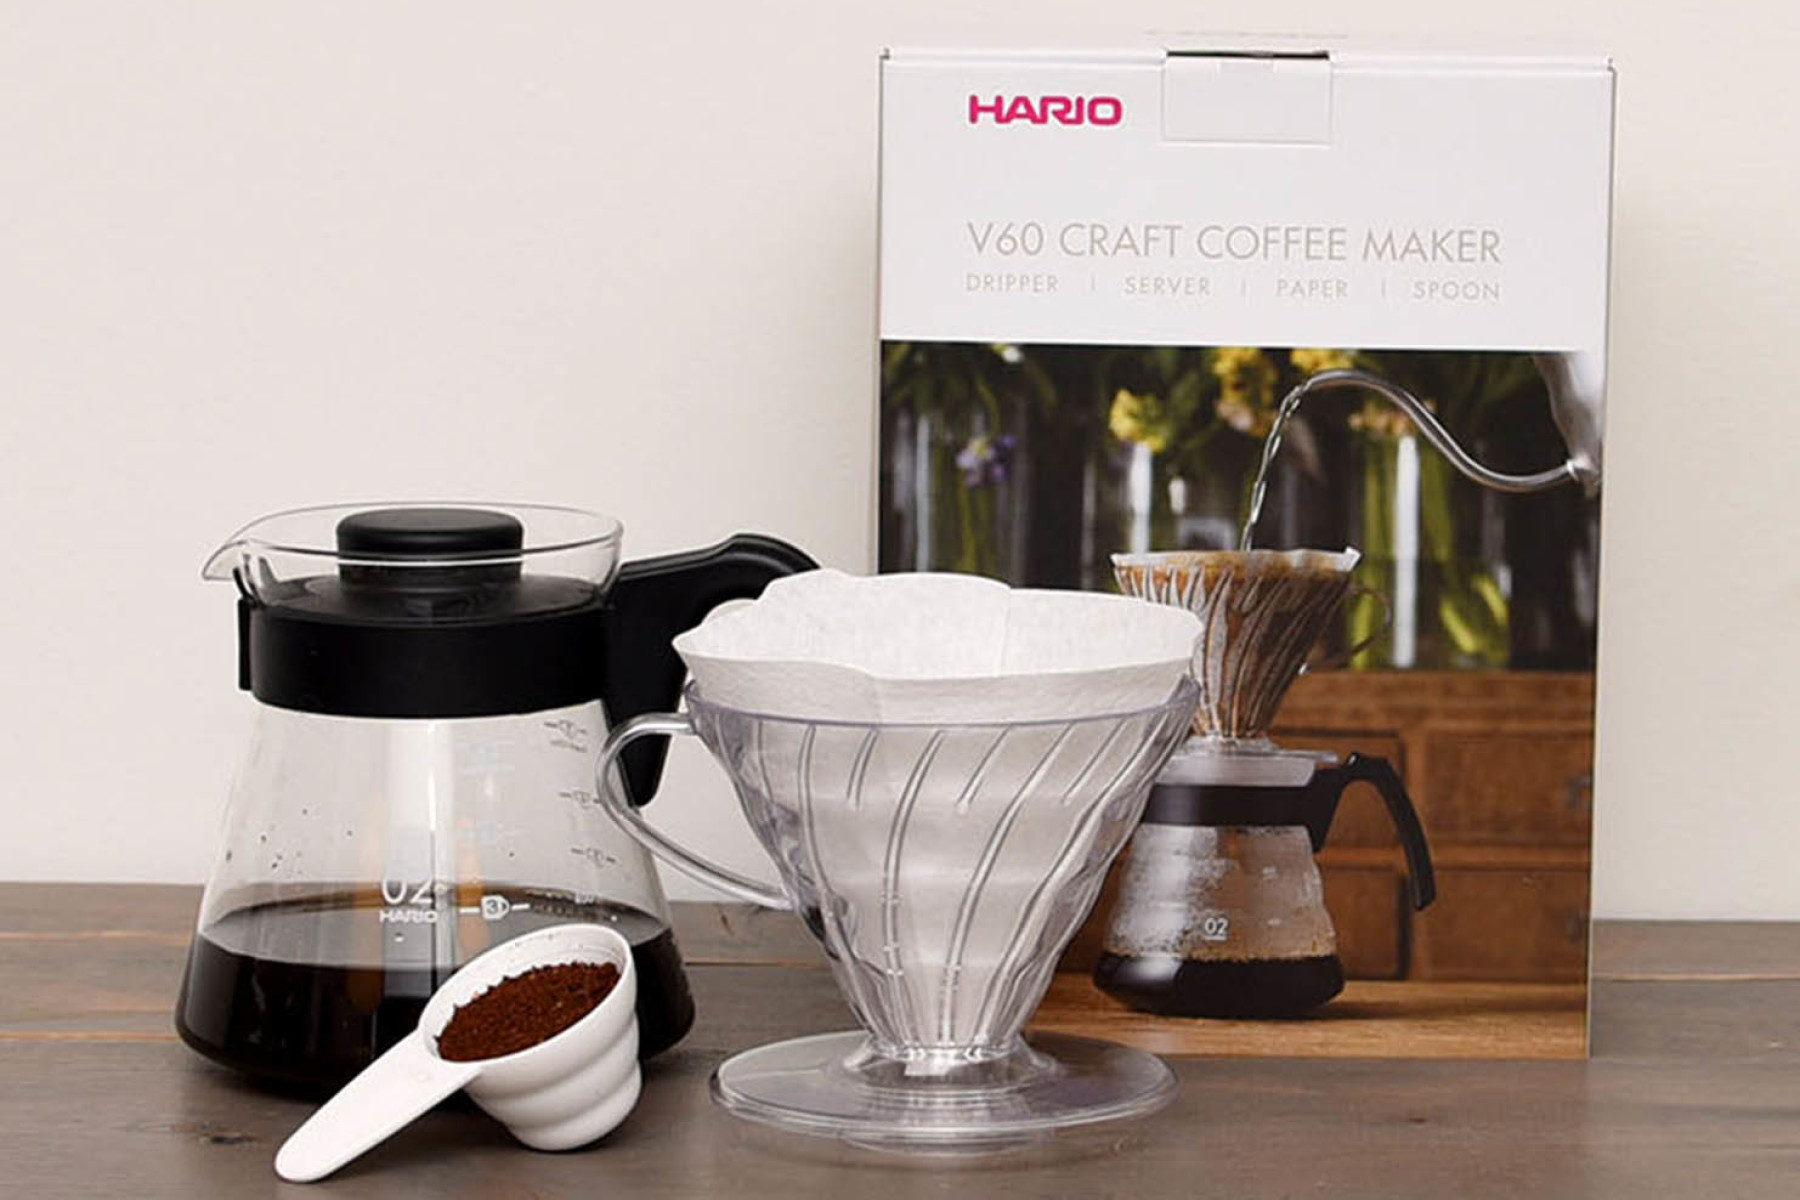 Hario V60 Coffee Maker kit + a bag of 250g specialty coffee beans